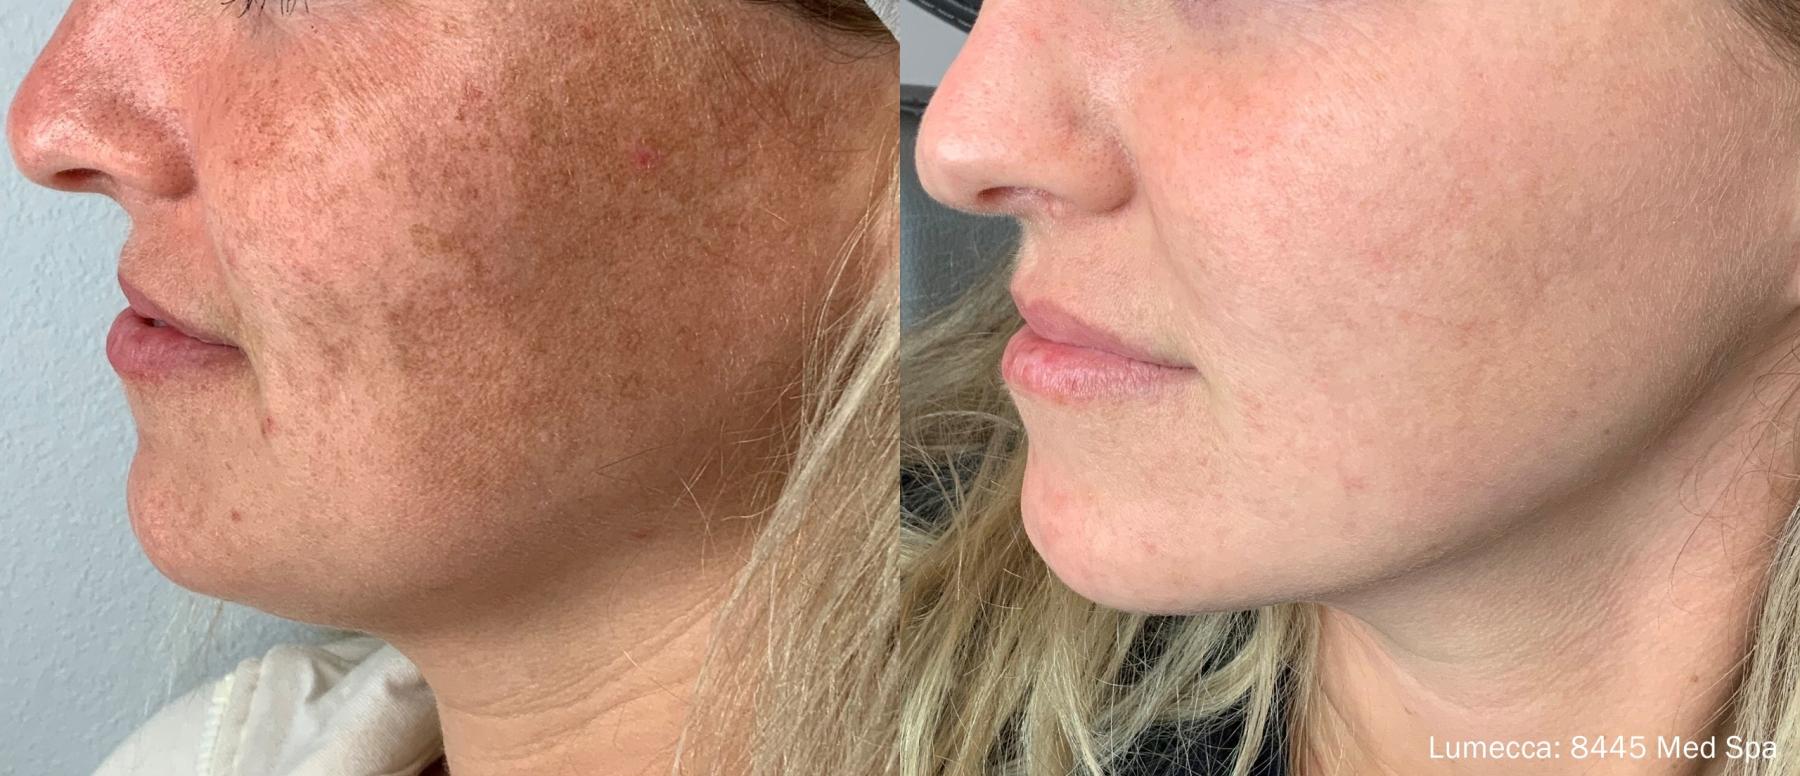 Lumecca IPL: Patient 2 - Before and After 1